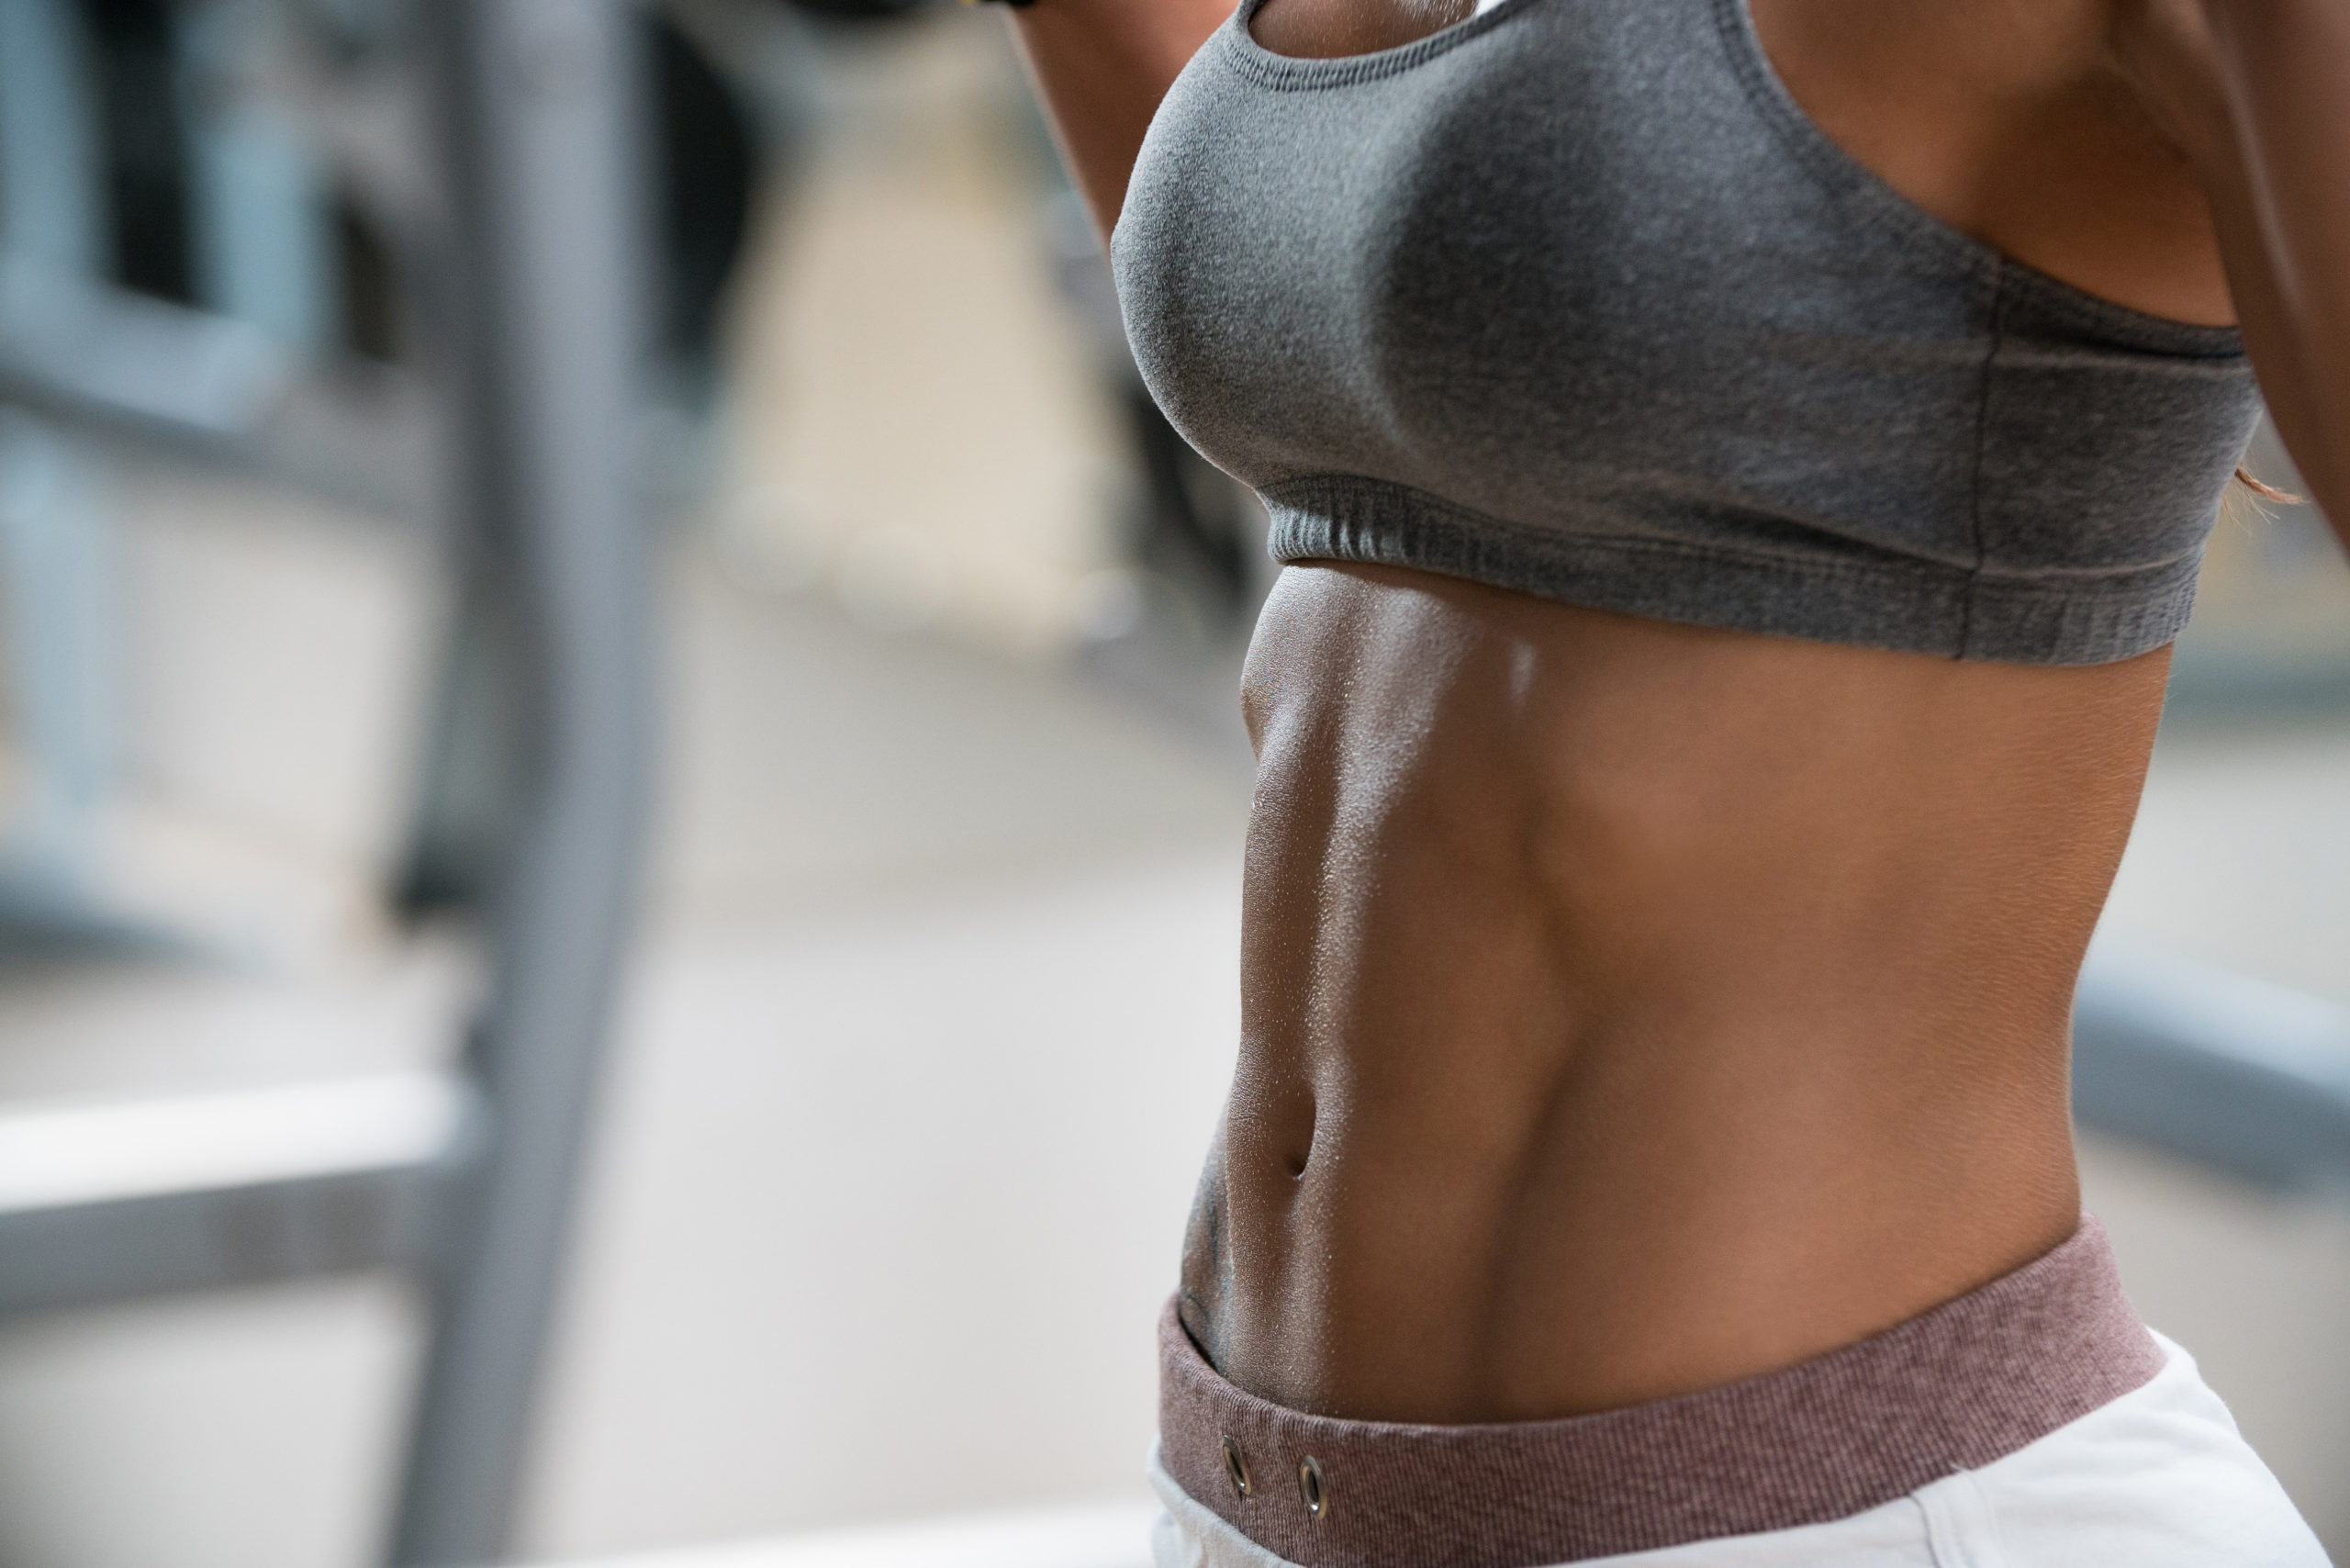 How to get a Toned Stomach: 5 Steps to Toning your Stomach